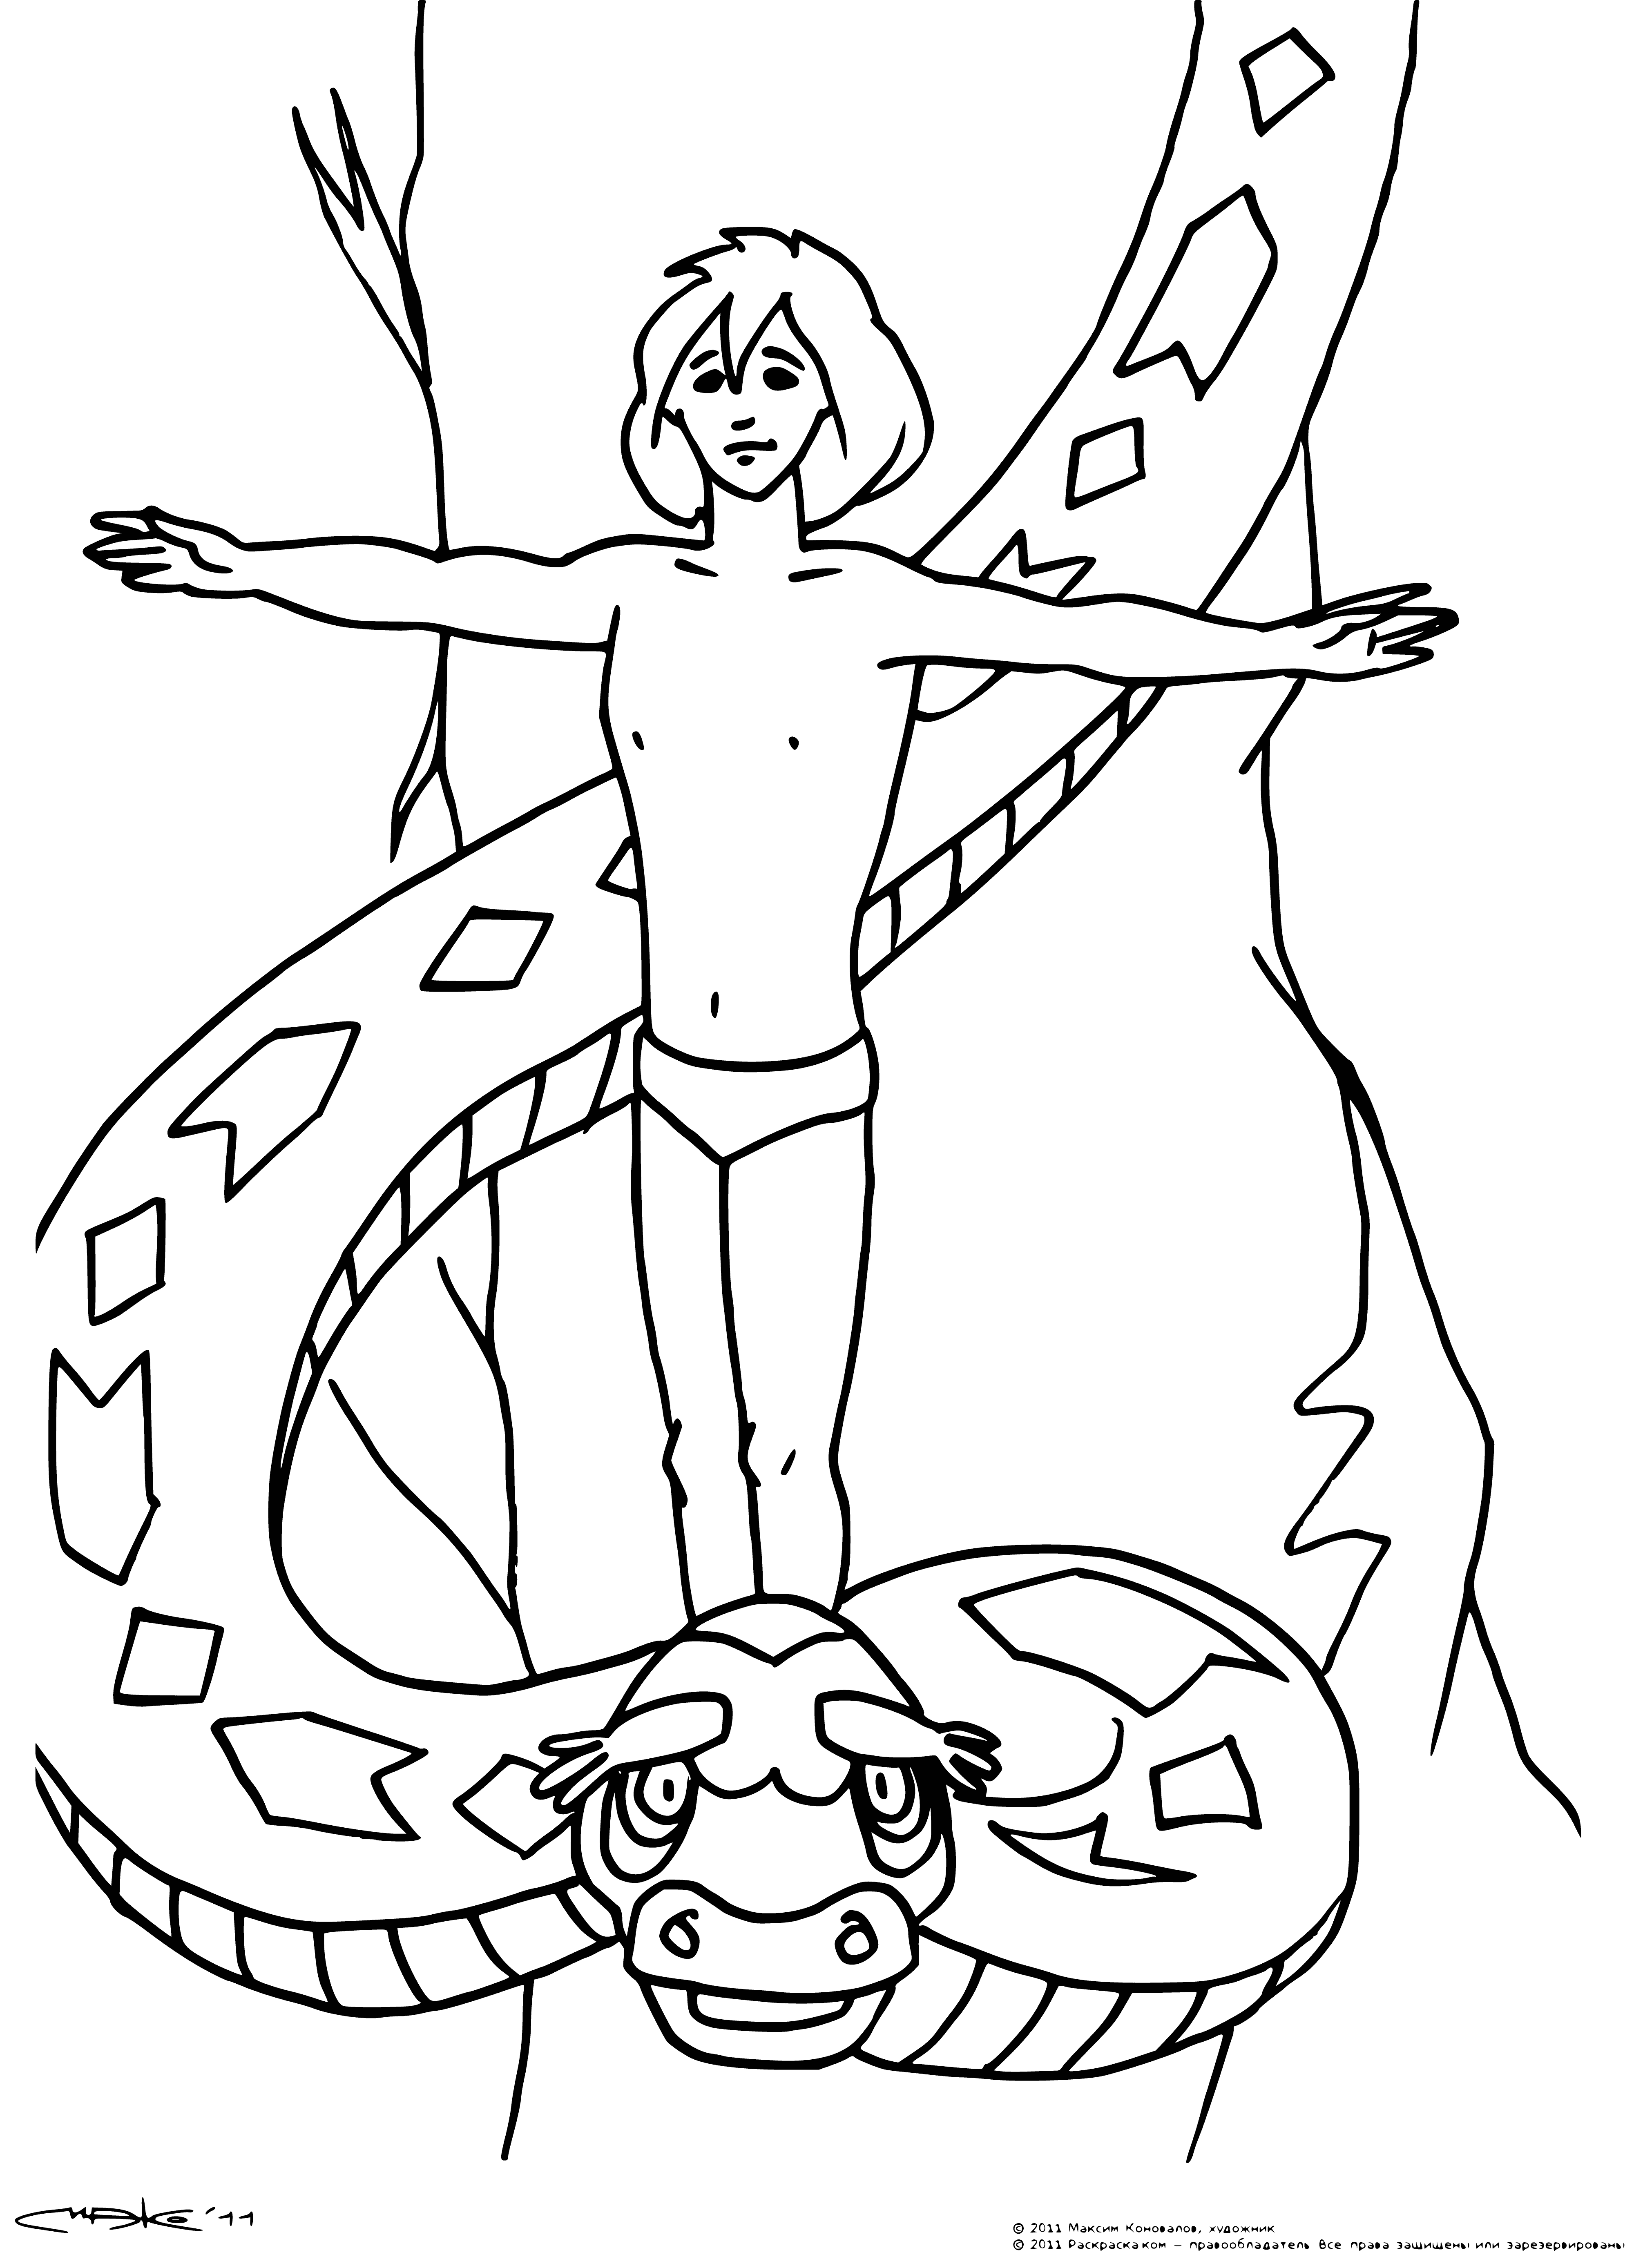 coloring page: Boy vs snake: A young boy stands with spear in hand, facing off a coiled snake near a boiling pot and dense forest.